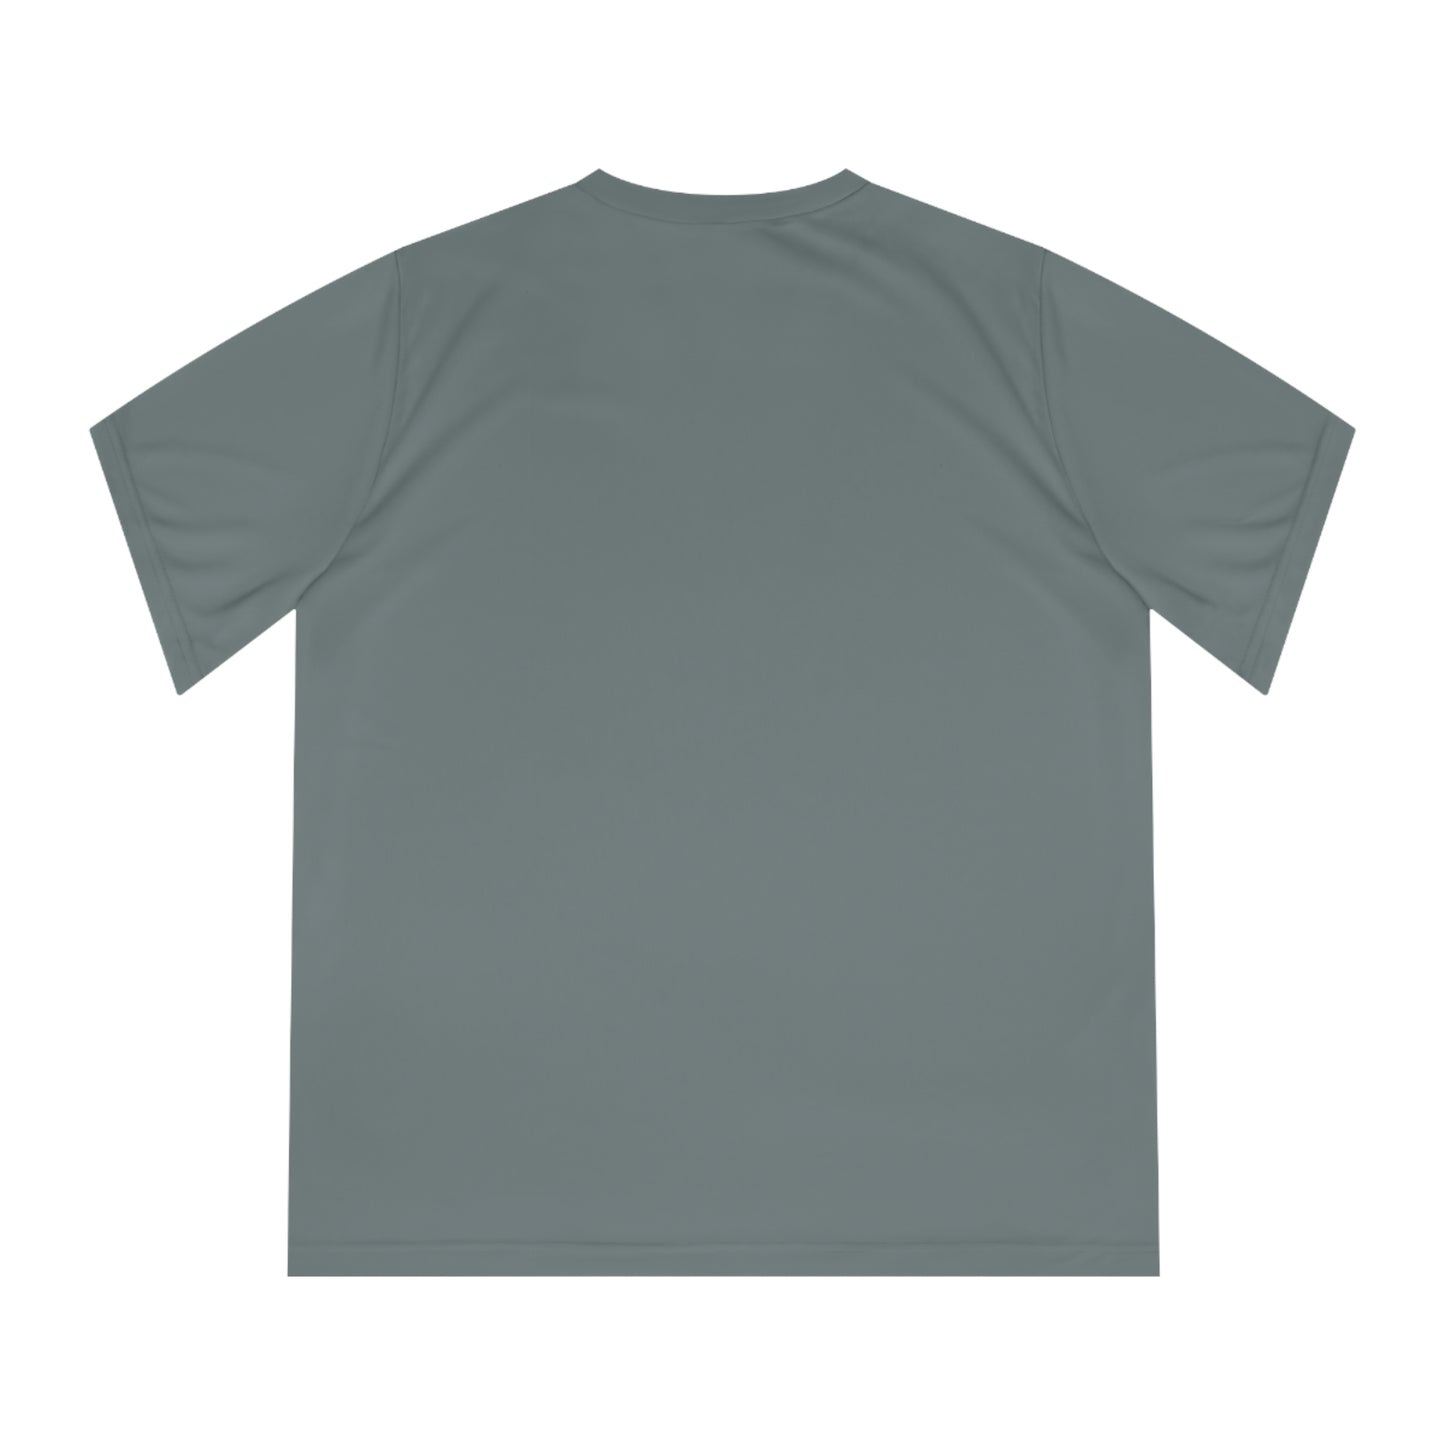 Flat back view of the grey t-shirt